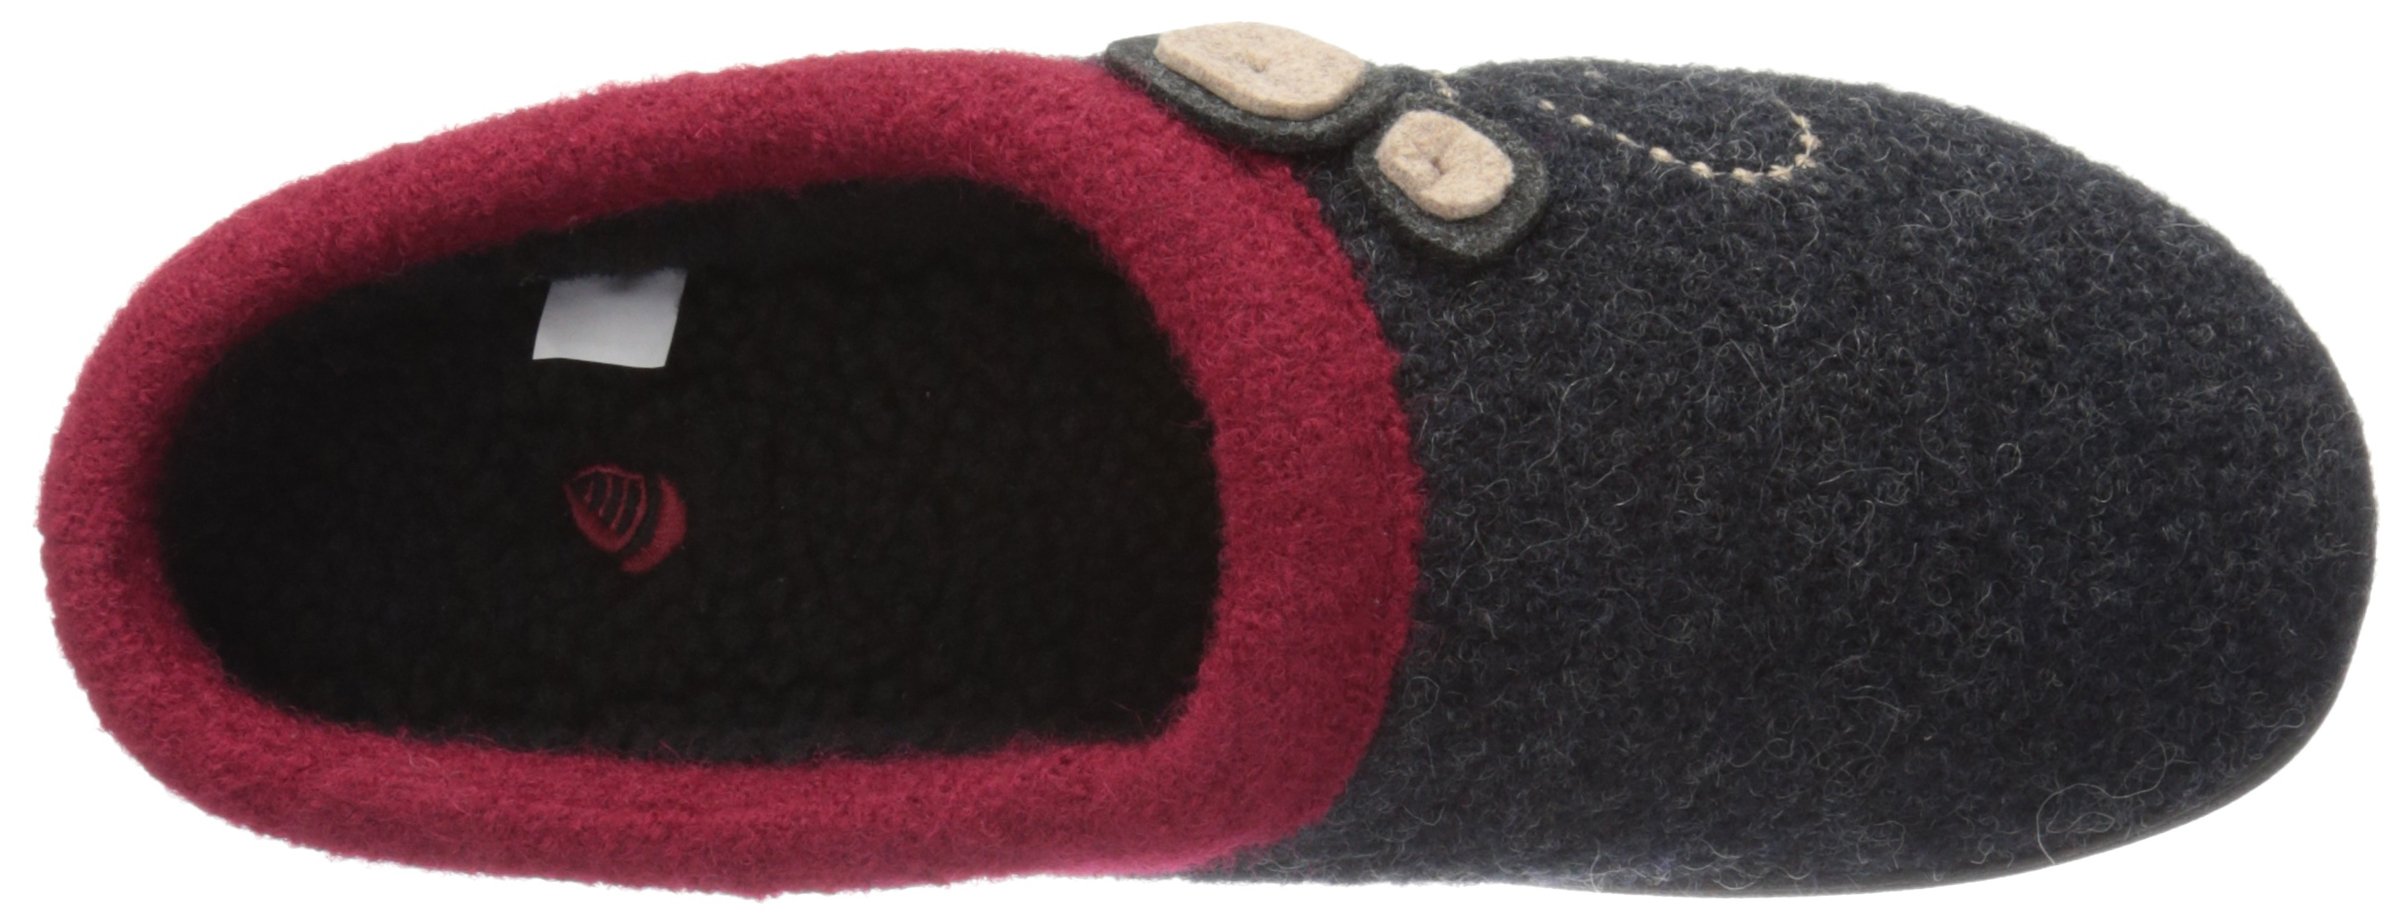 Acorn Women's Clog Slippers, Multi-Layer Memory Foam Footbed with Arch Support